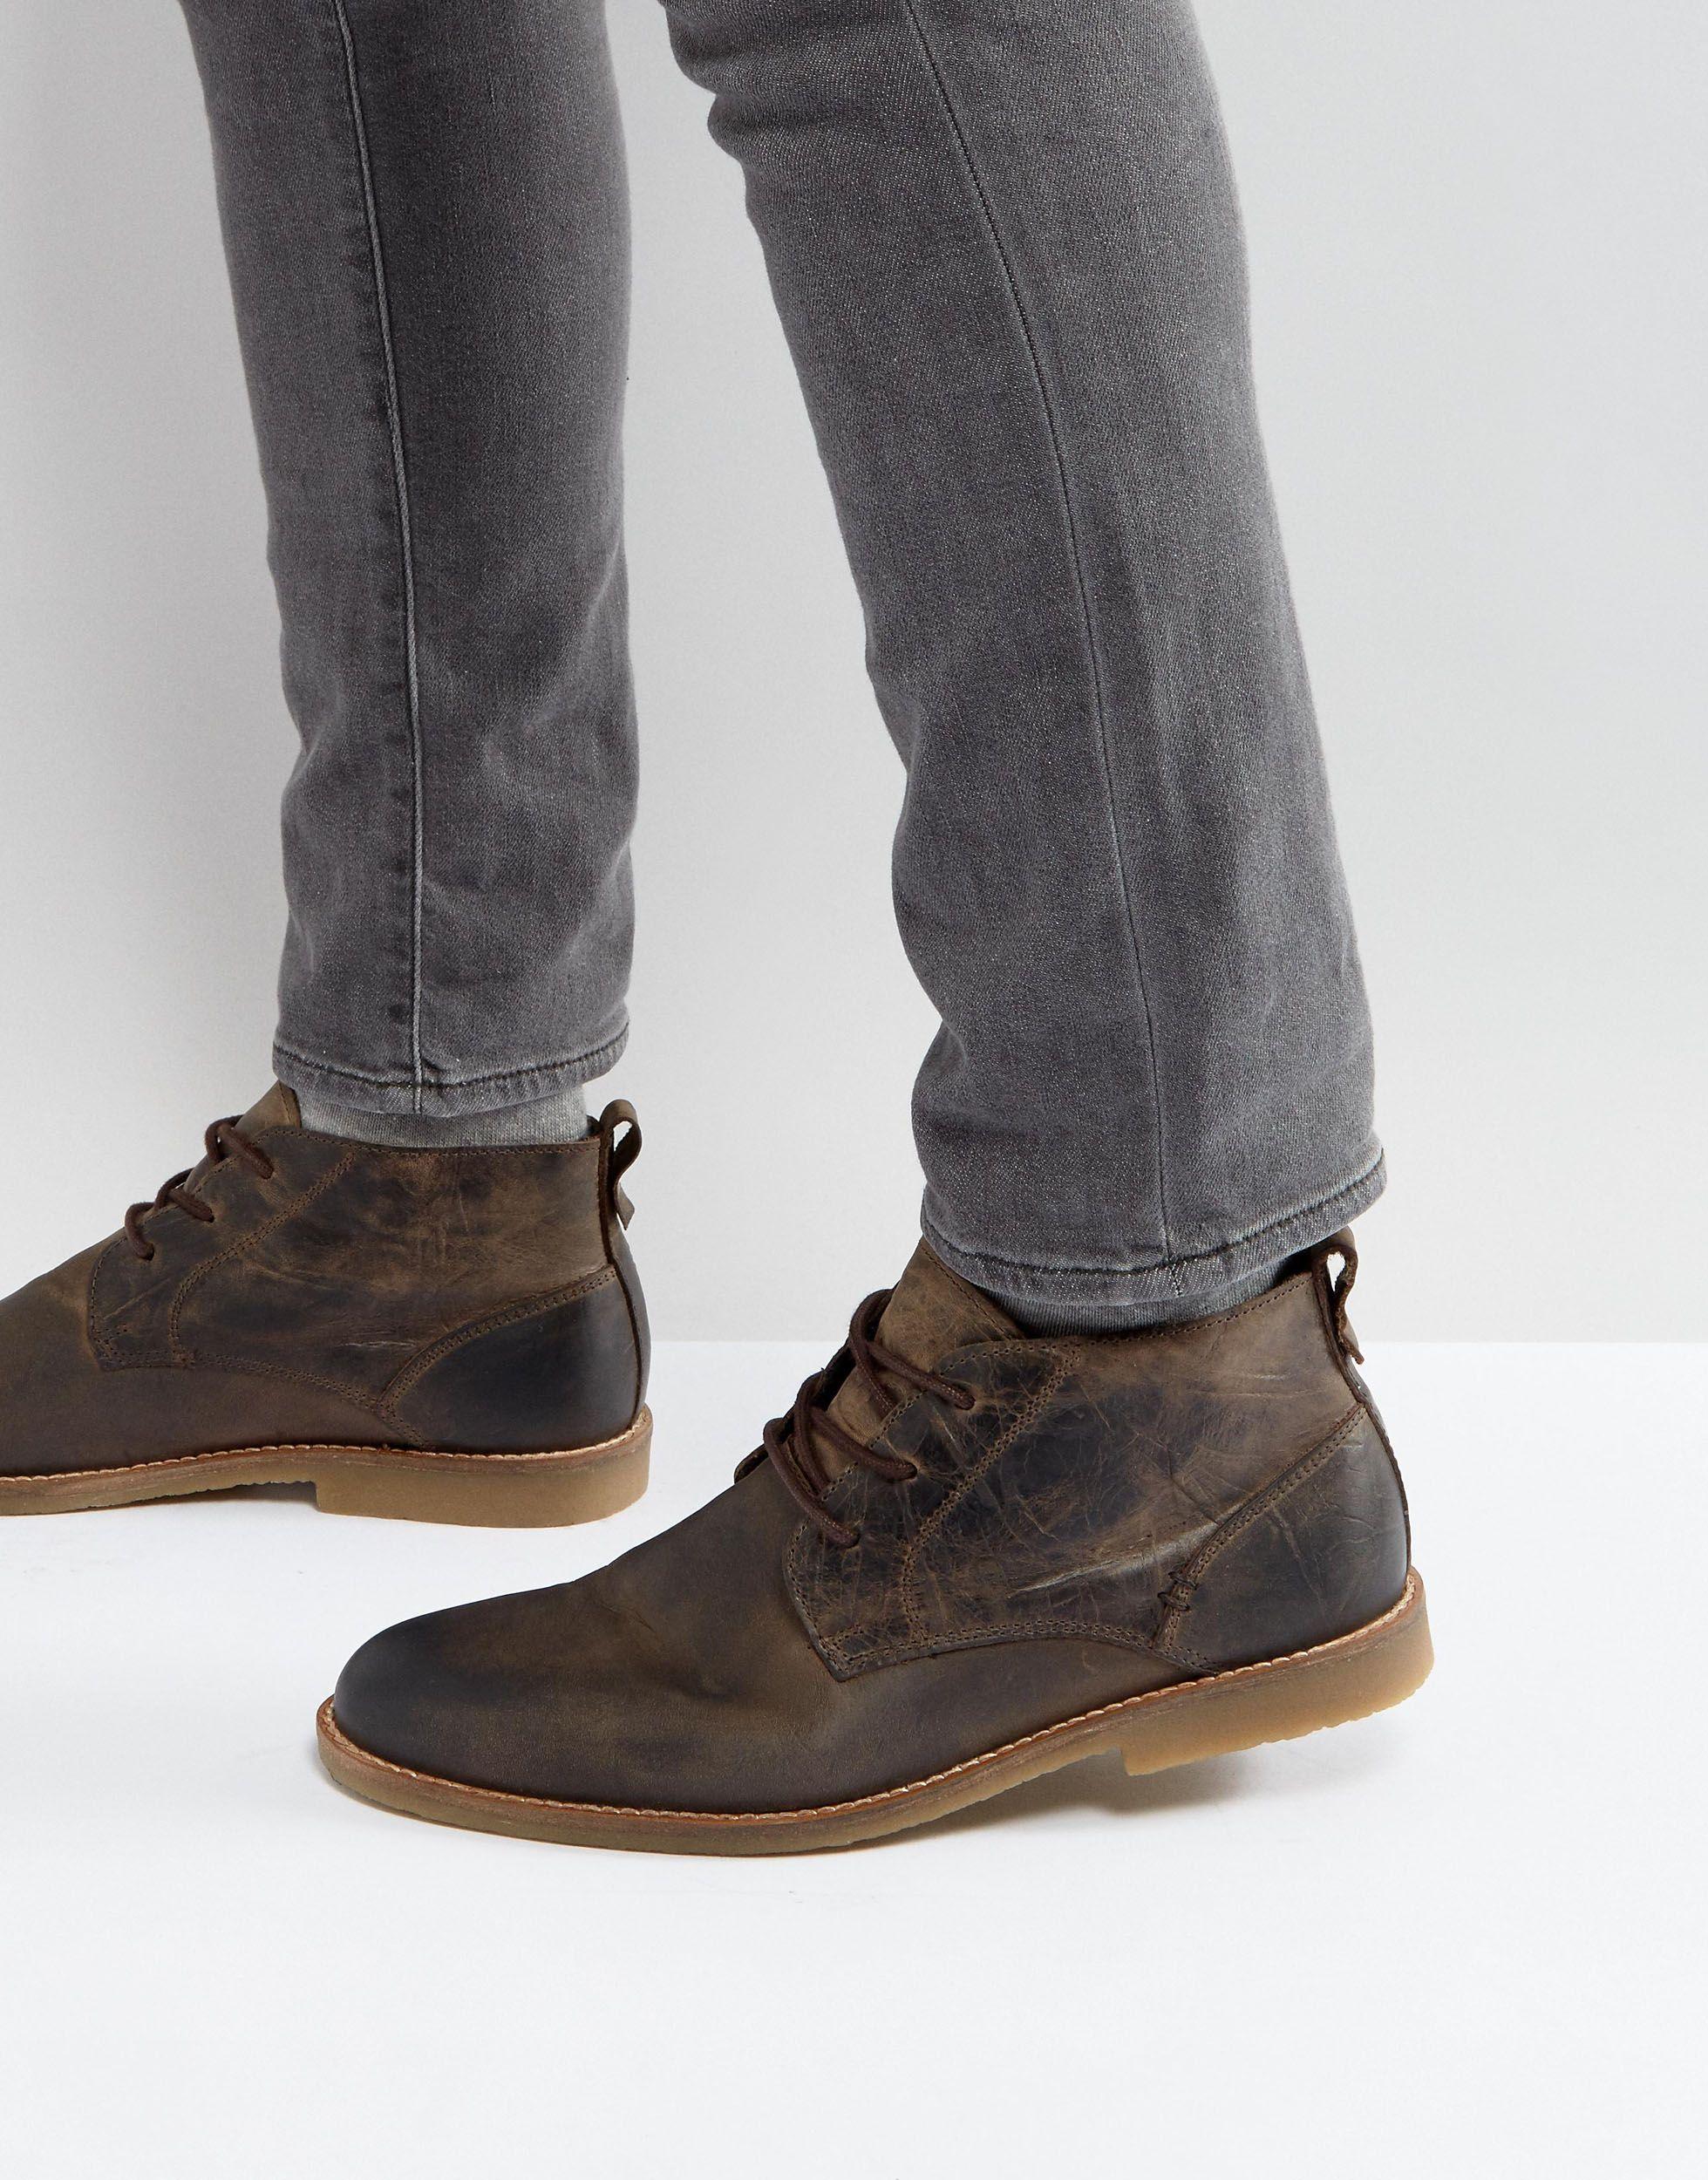 River Island Leather Desert Boots in Brown for Men - Lyst